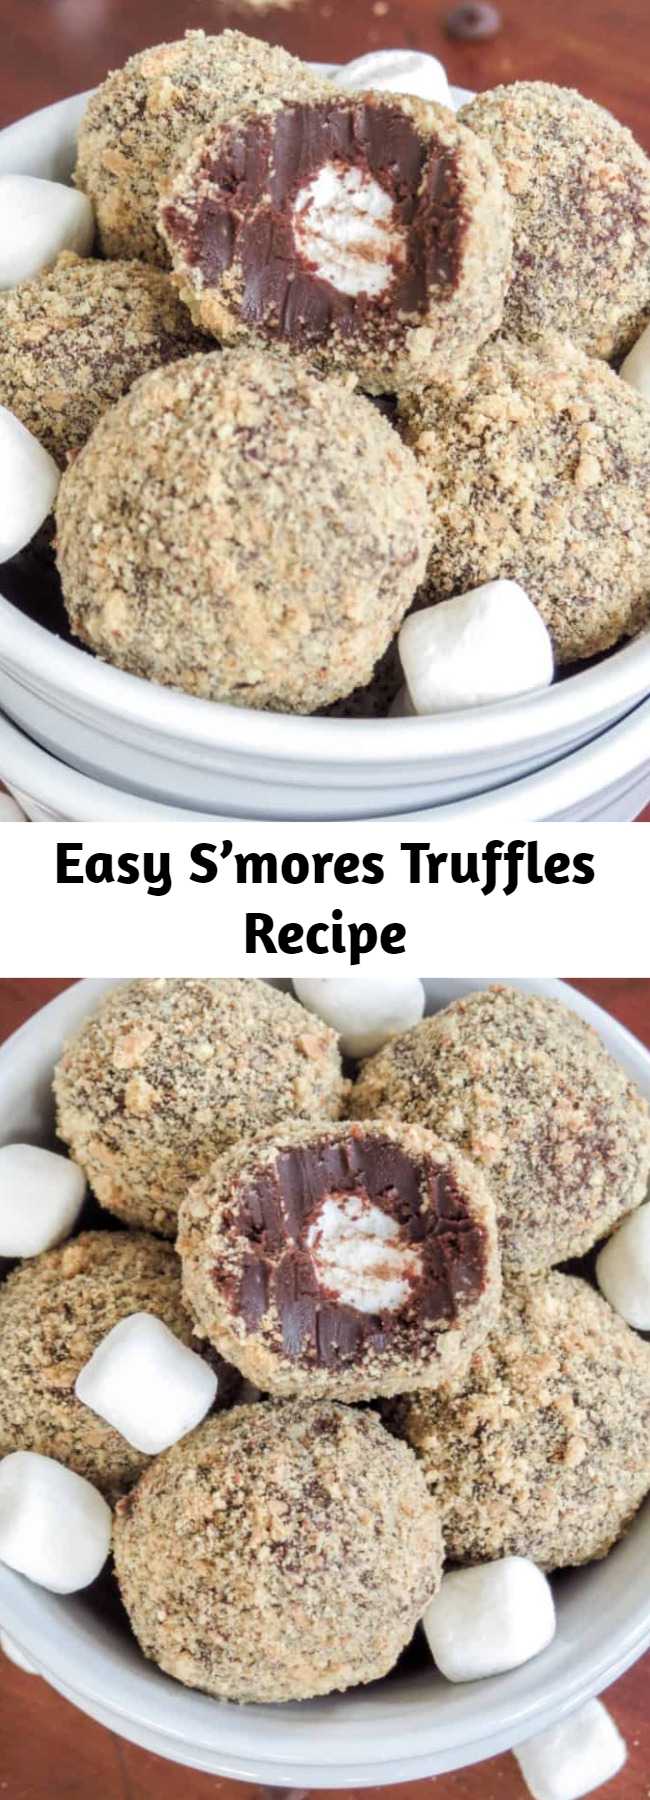 Easy S’mores Truffles Recipe - The chocolate is so creamy, exactly what you would expect from a truffle and the marshmallows stay so soft inside, they’re just perfect. I rolled them in a generous costing of graham cracker crumbs just for good measure. These are bite-sized heaven.